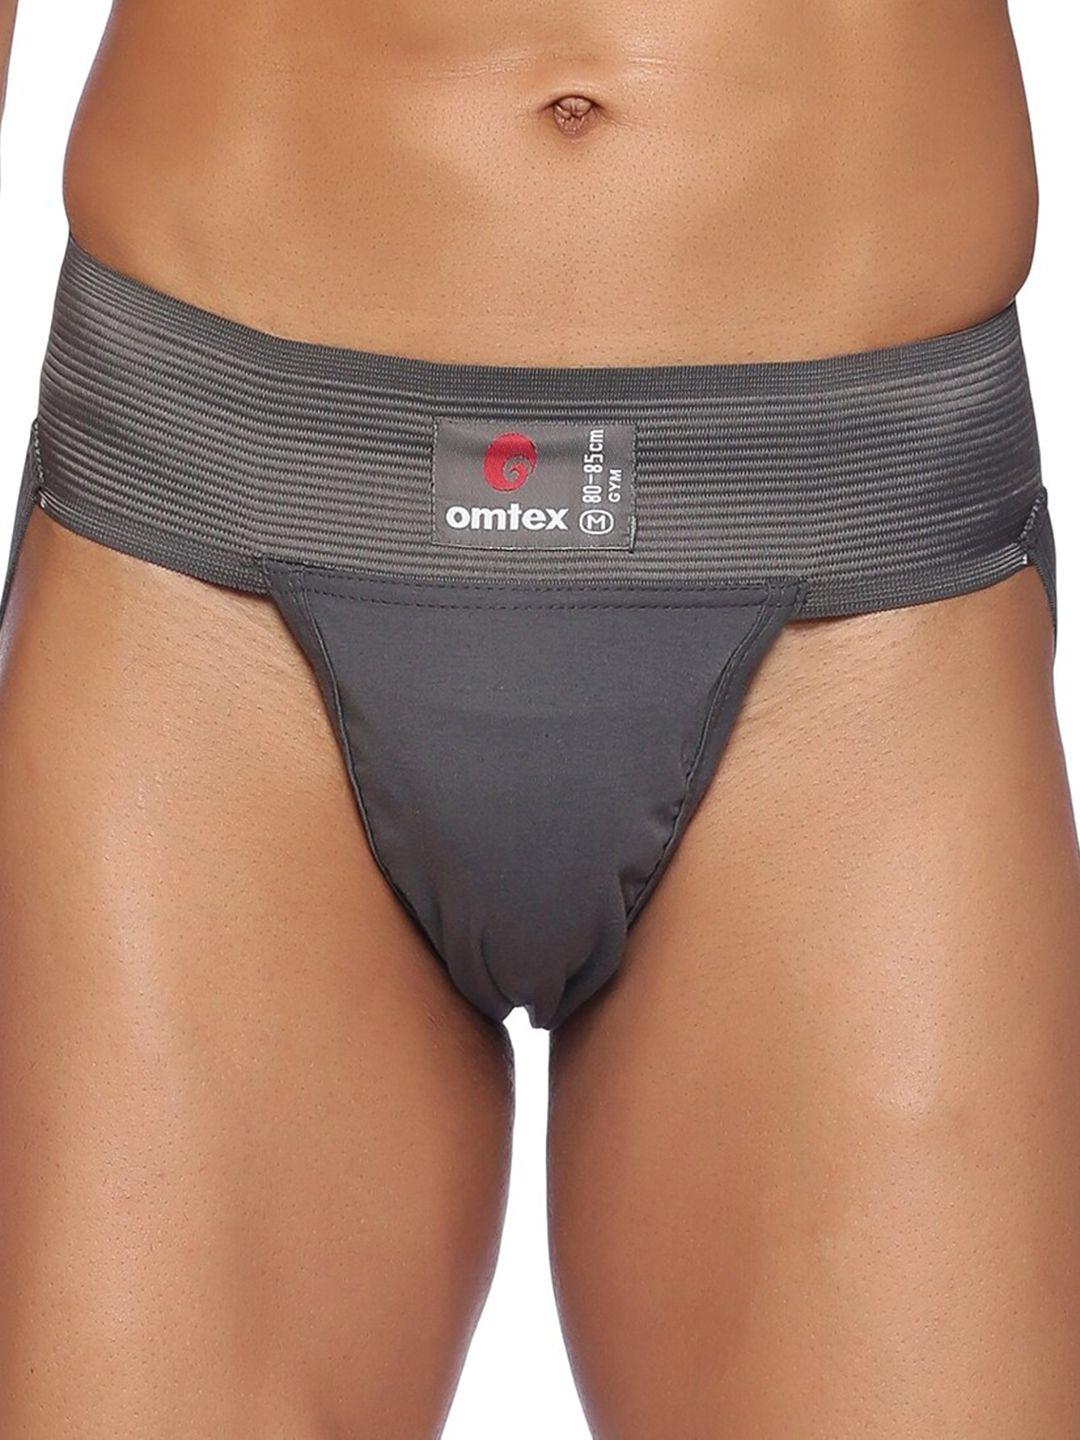 omtex-logo-printed-stretchable-supporter-jockstraps-with-cup-pocket-briefs-gymgxs